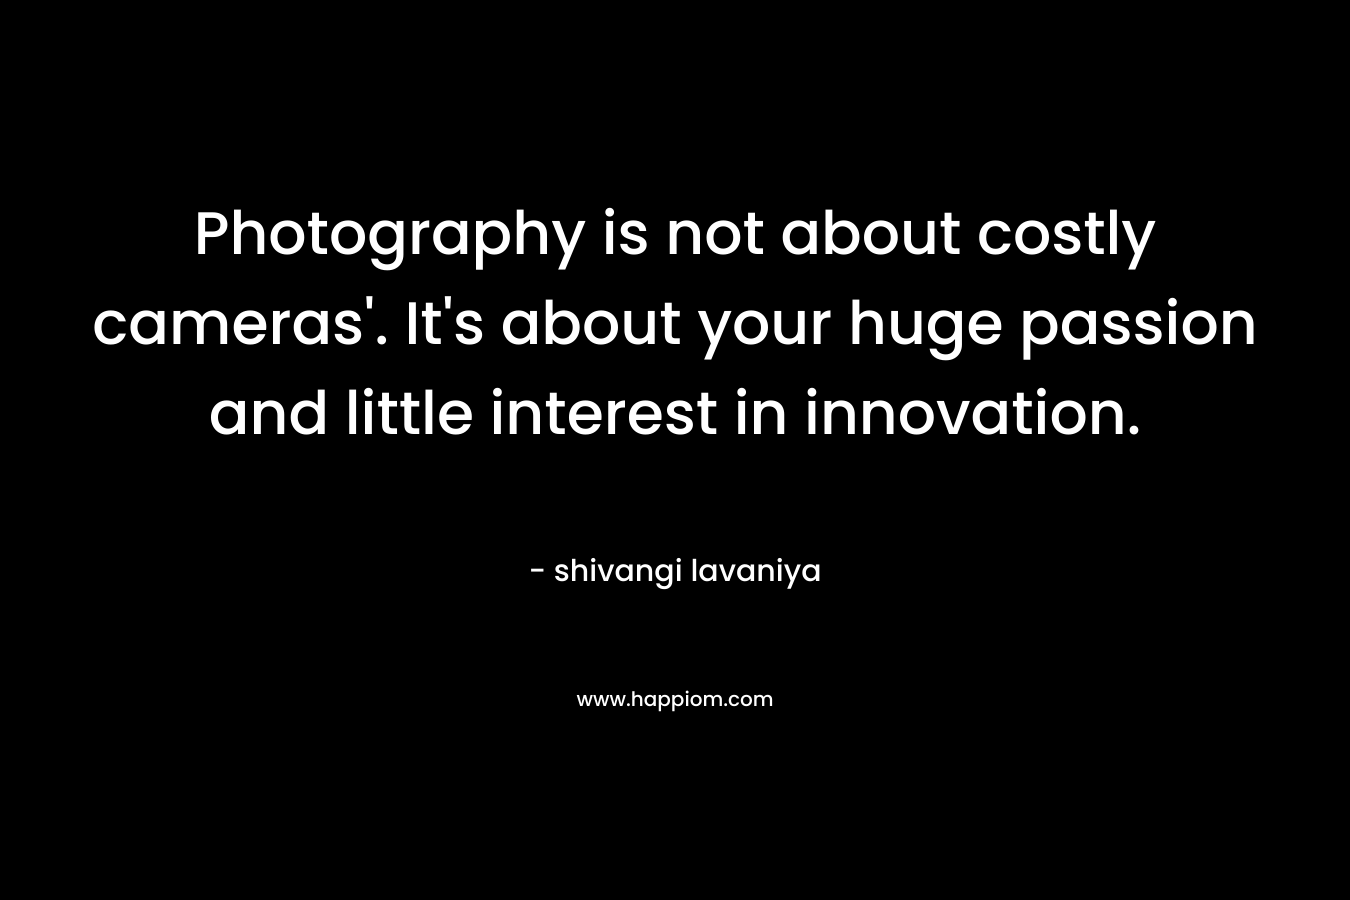 Photography is not about costly cameras’. It’s about your huge passion and little interest in innovation. – shivangi lavaniya